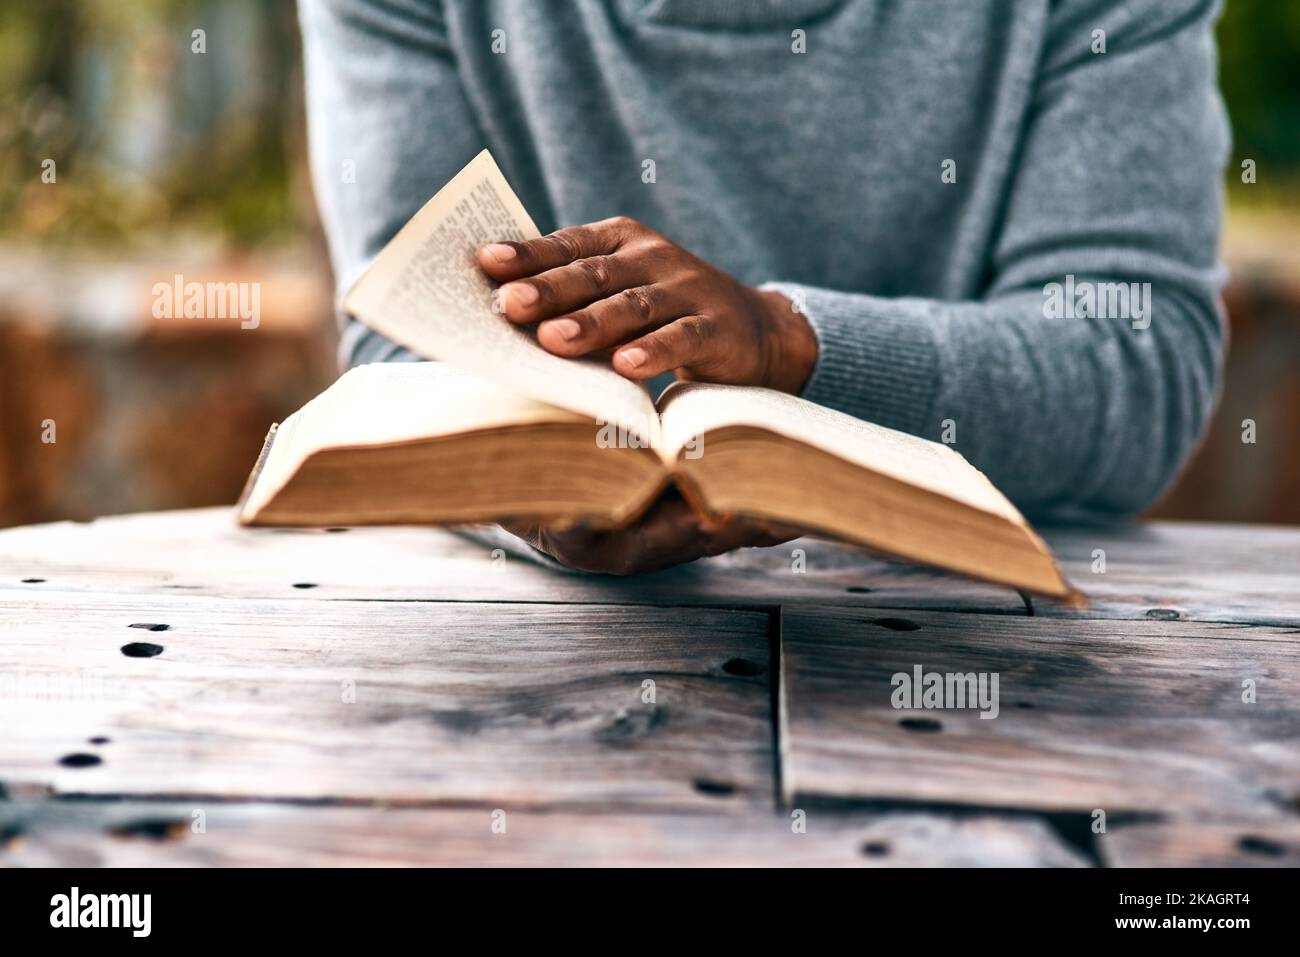 Seeking for some answers. an unrecognizable man reading a book. Stock Photo